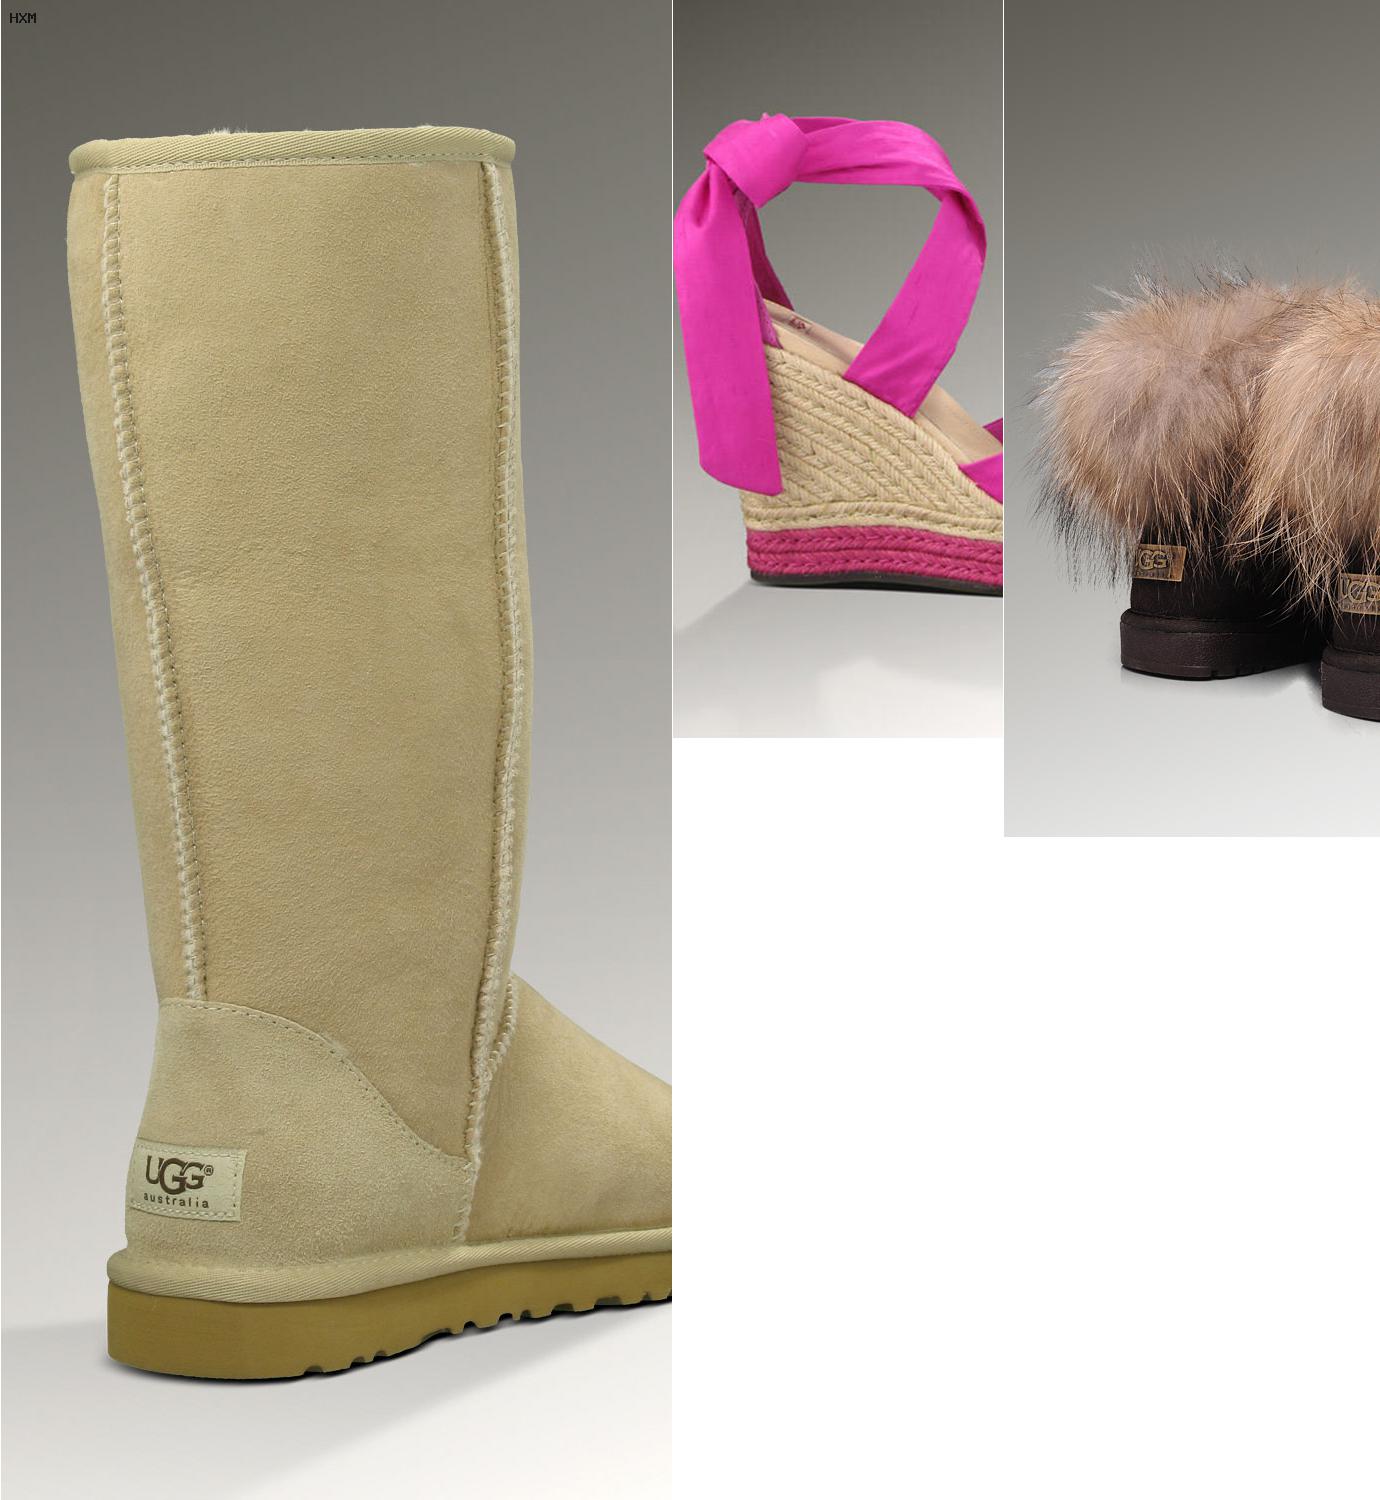 cheap real uggs online